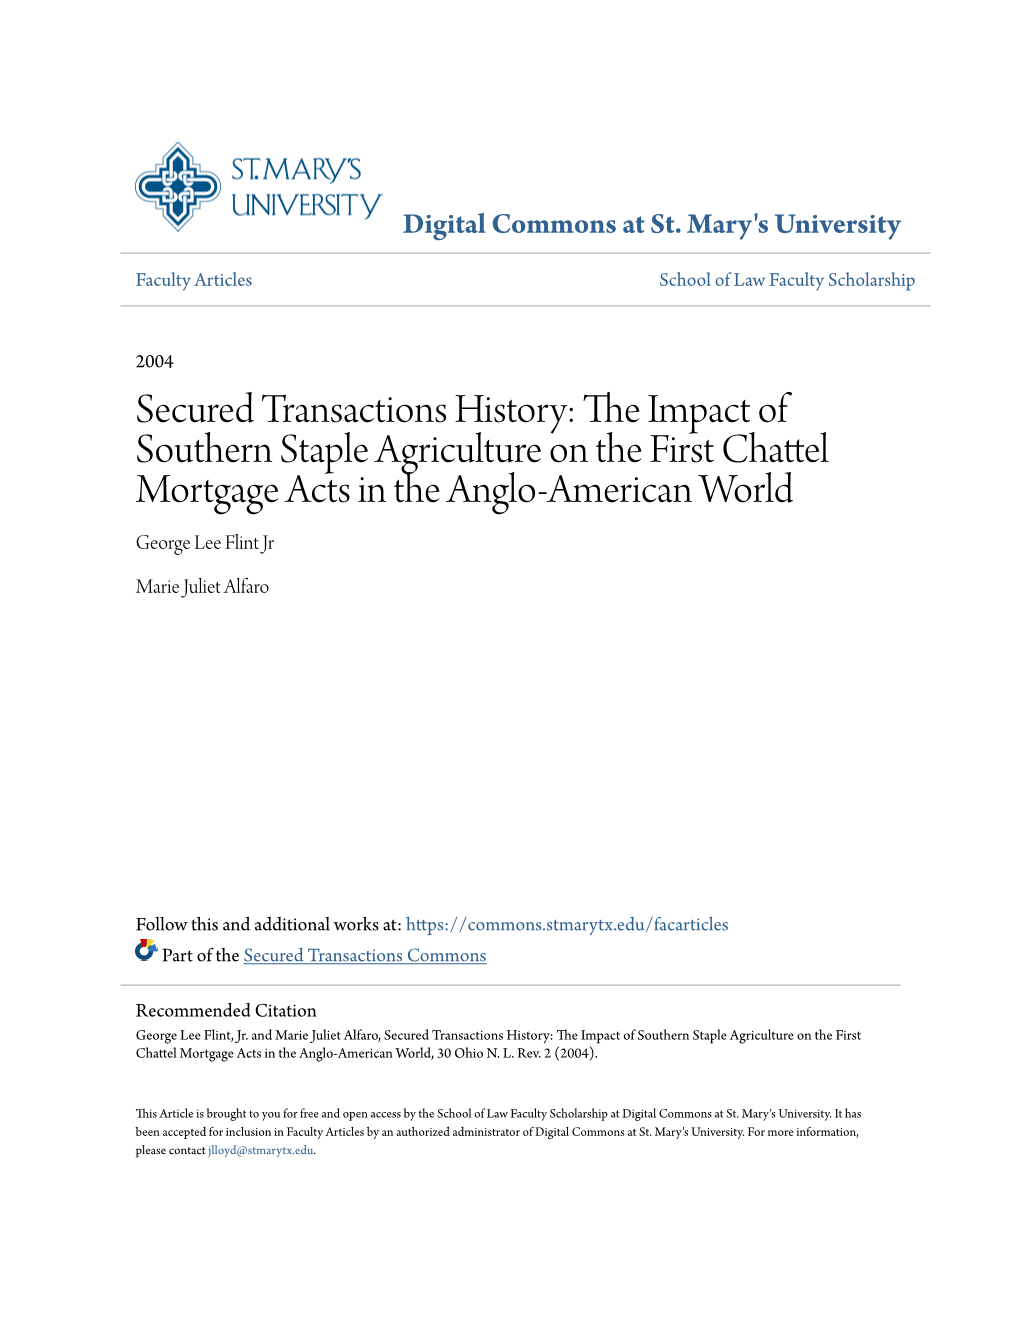 The Impact of Southern Staple Agriculture on the First Chattel Mortgage Acts in the Anglo-American World